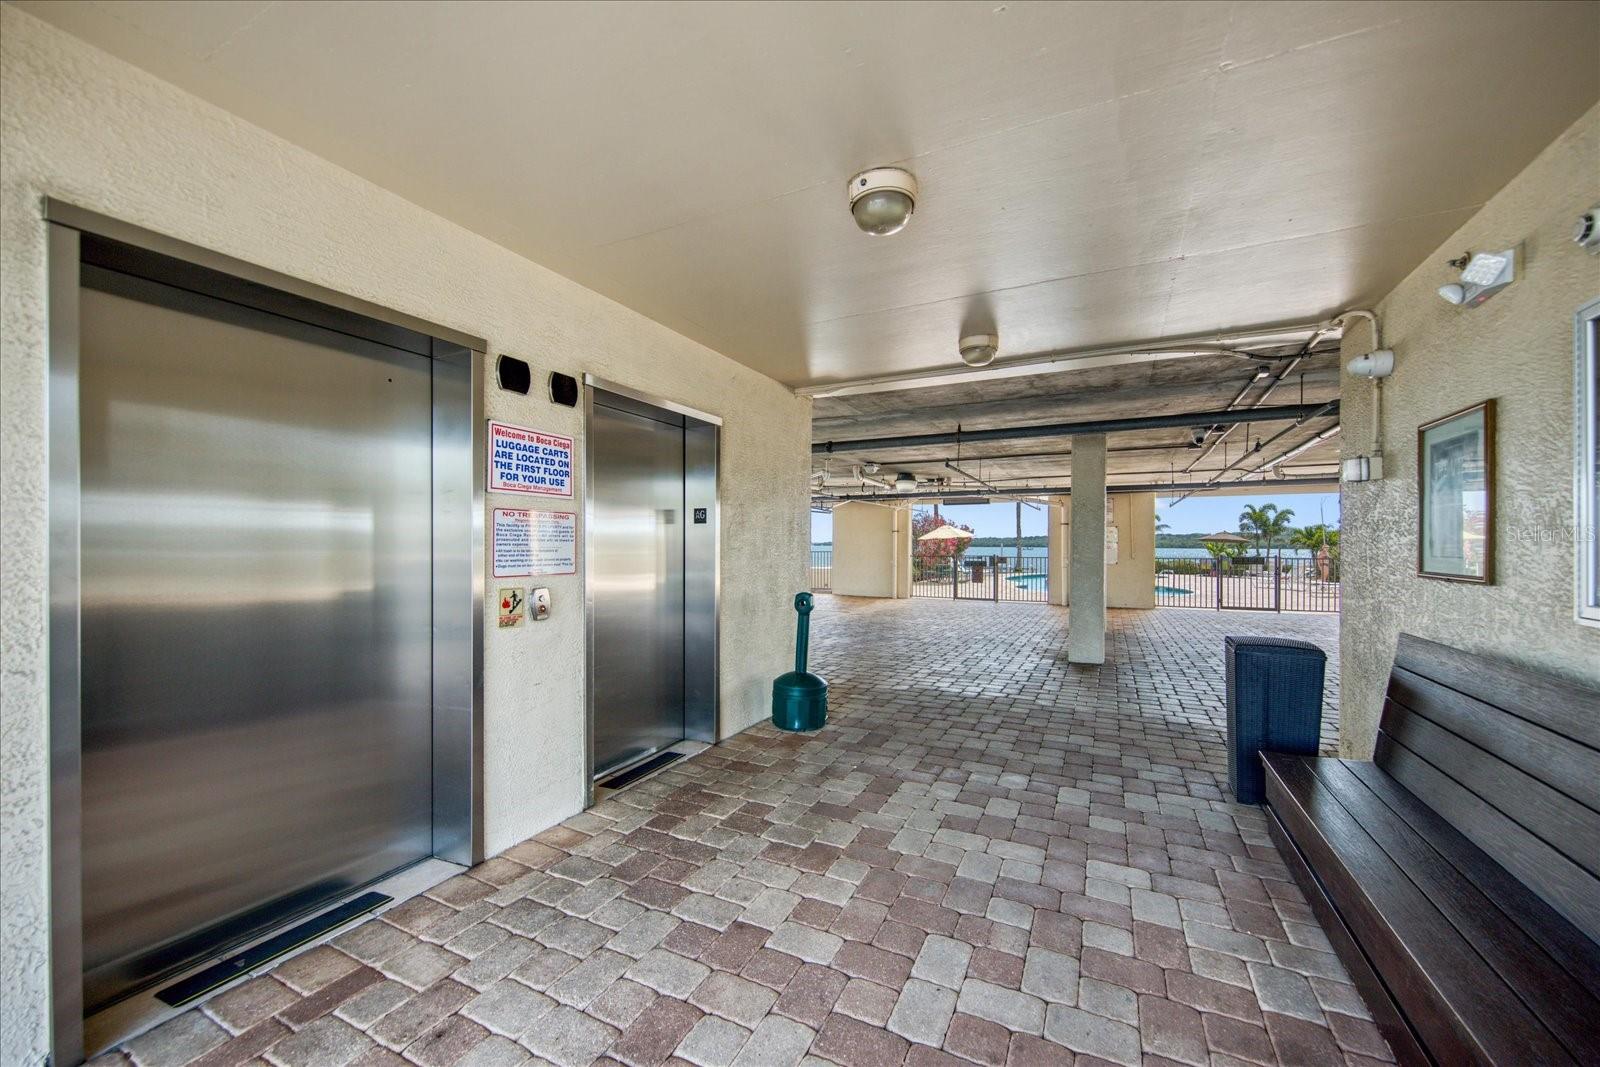 Elevators for those large grocery runs or your short term rental guests to bring in their luggage!